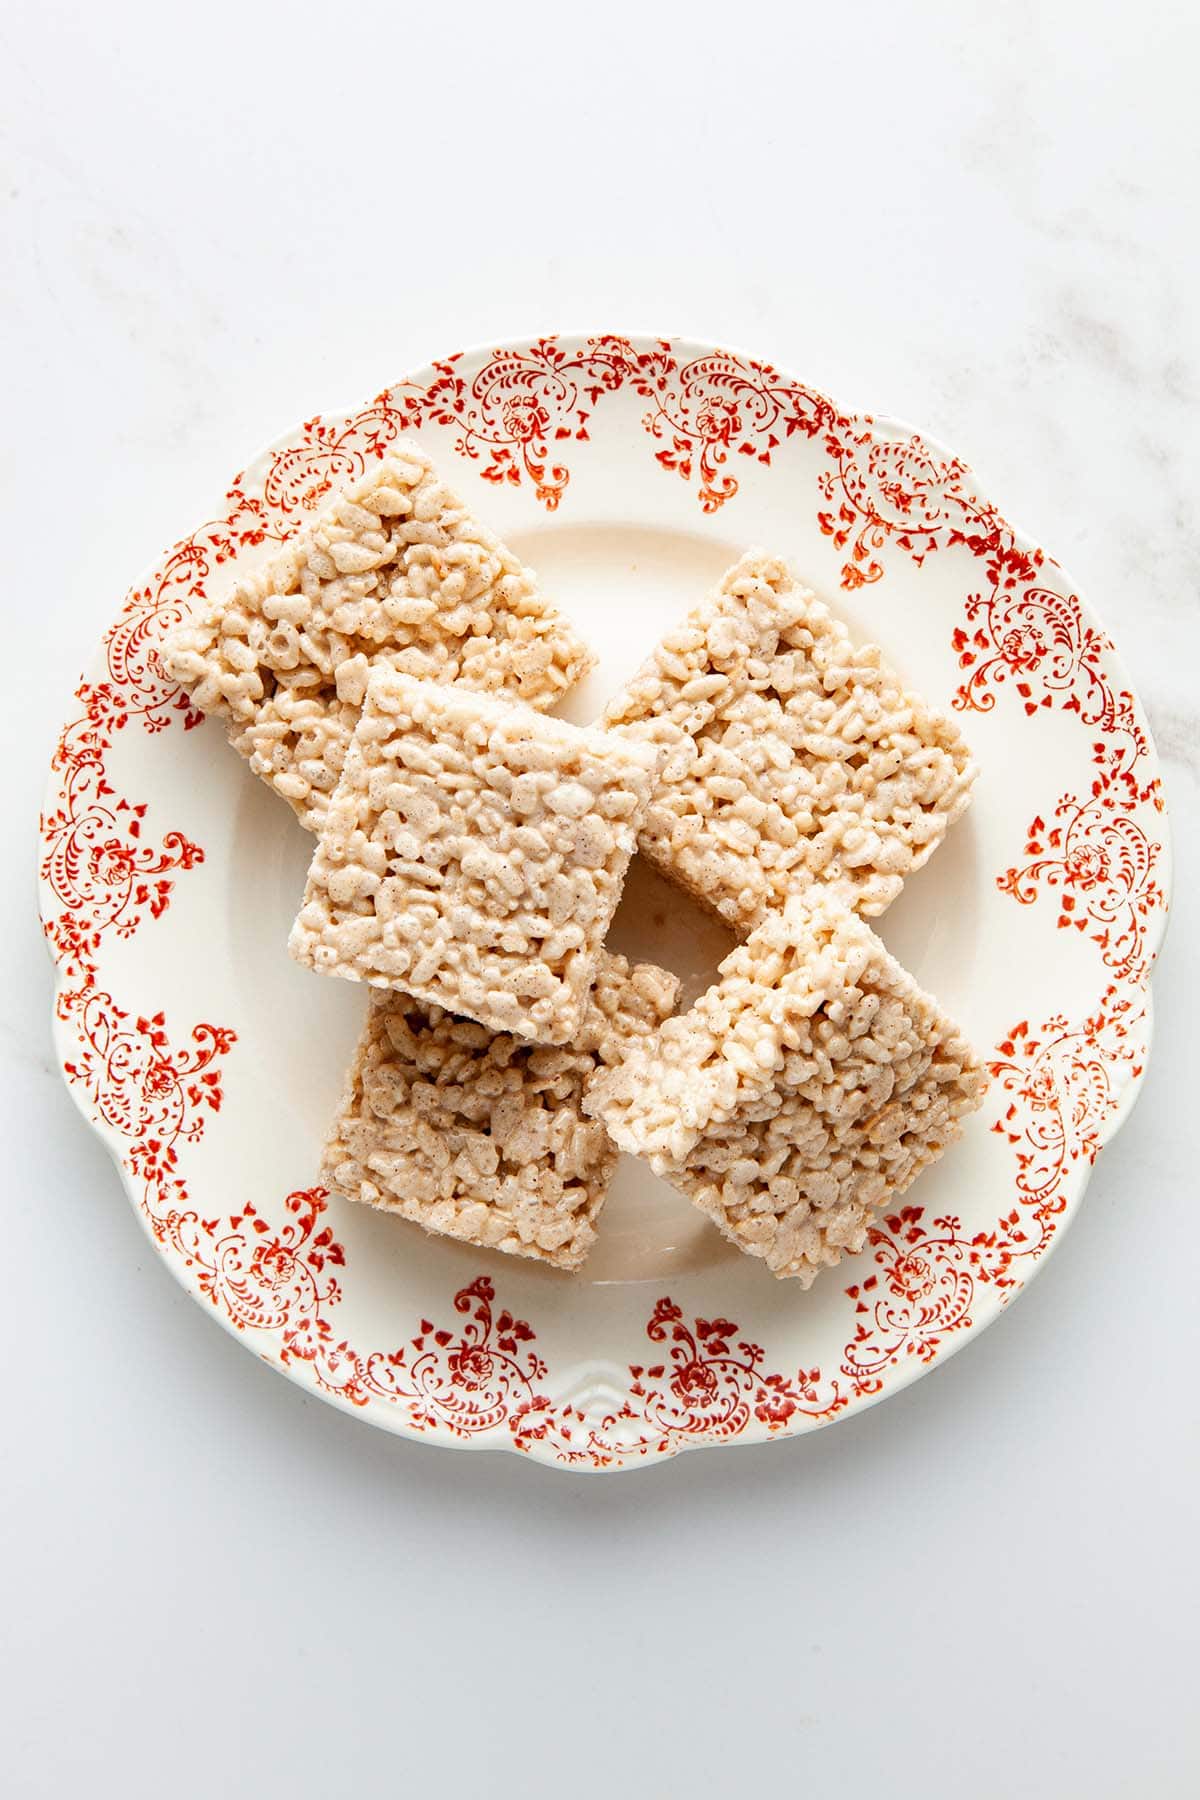 Chai-spiced Rice Krispie treats on a vintage red and white plate.